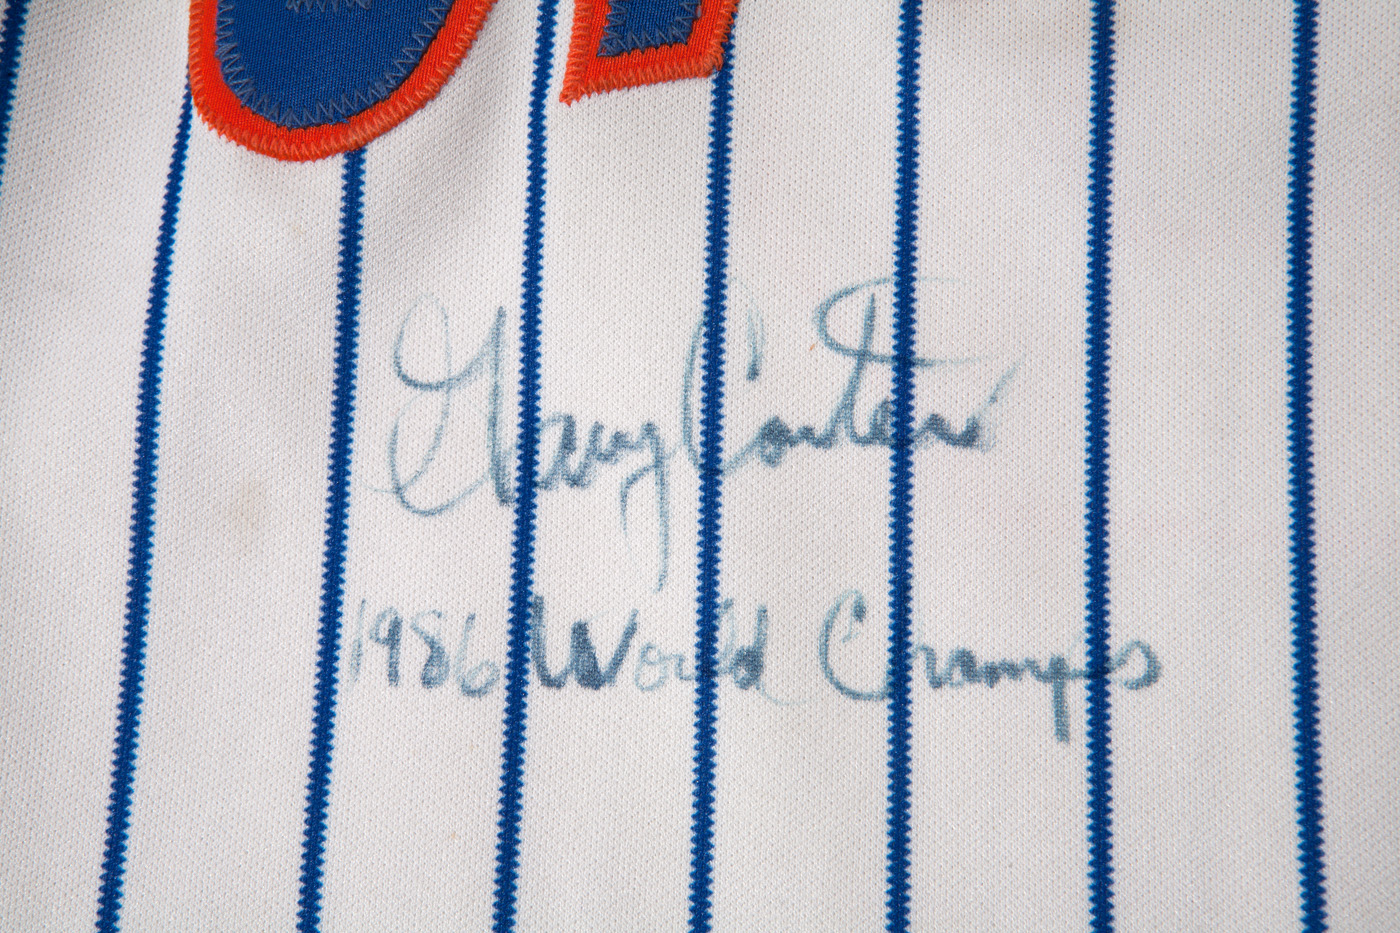 Lot Detail - 1986 Gary Carter New York Mets MLB Playoffs Game-Used